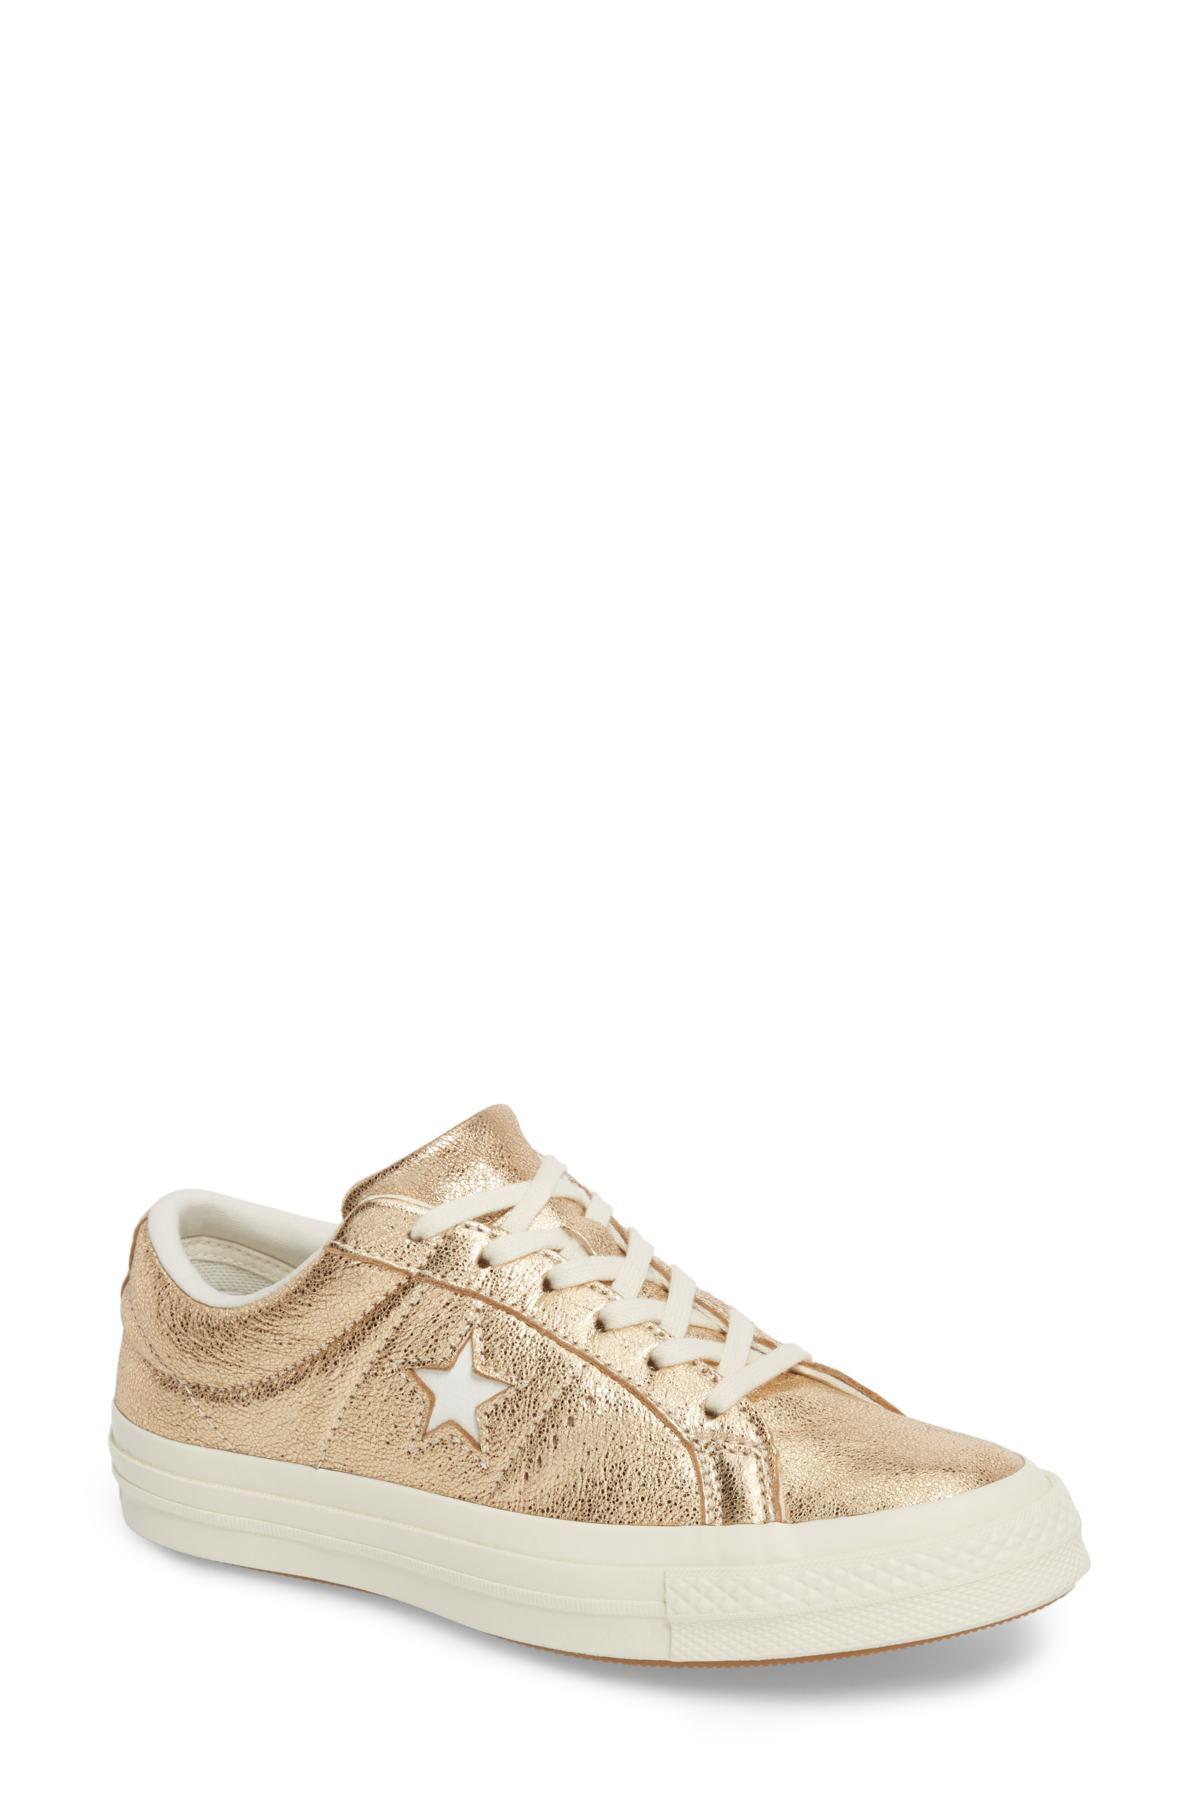 Converse One Star Ox Women's Shoes (trainers) In Gold in Metallic 